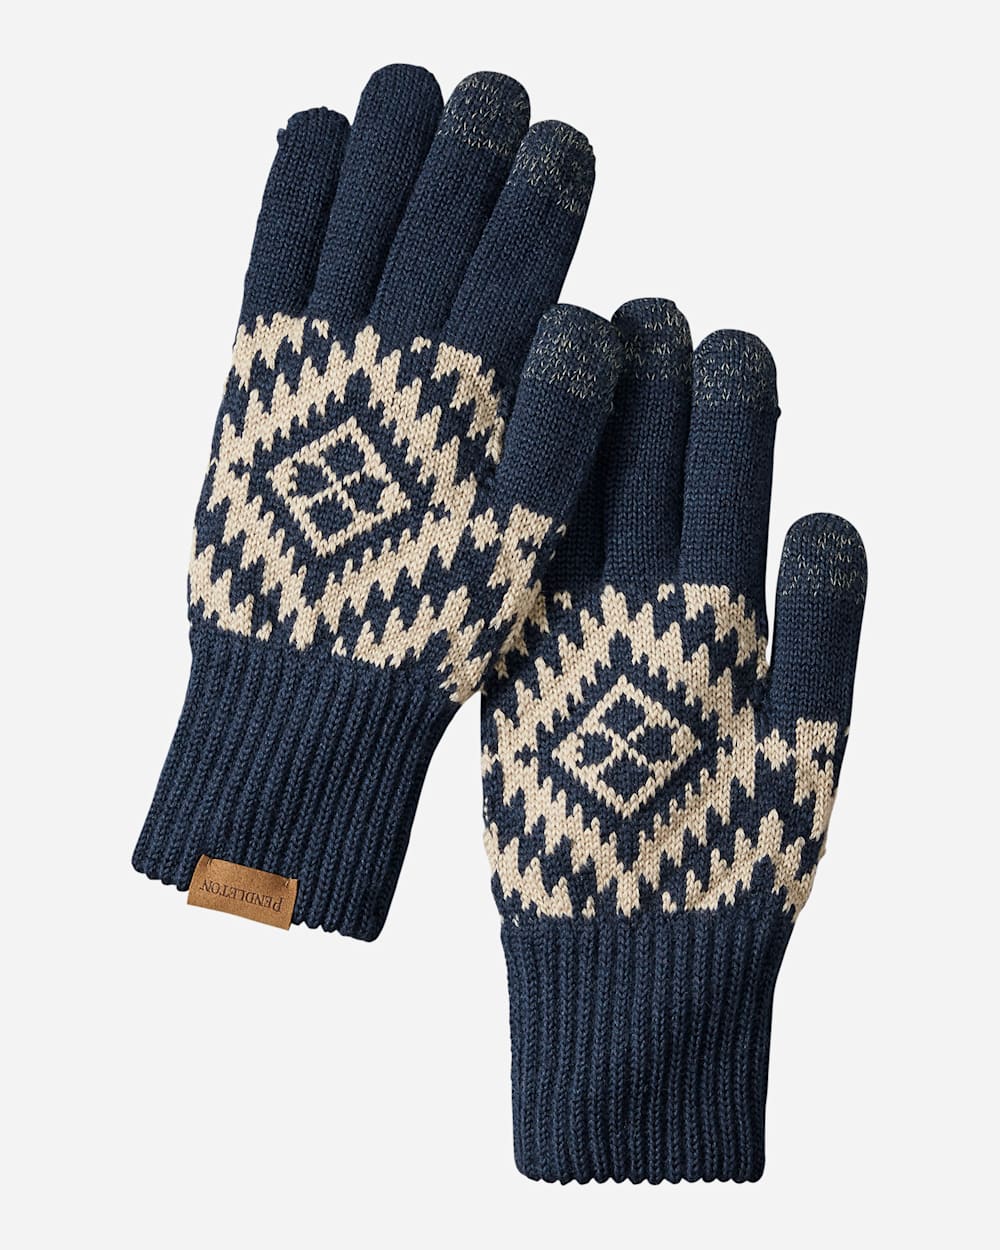 JACQUARD TEXTING GLOVES IN JOURNEY WEST NAVY image number 1